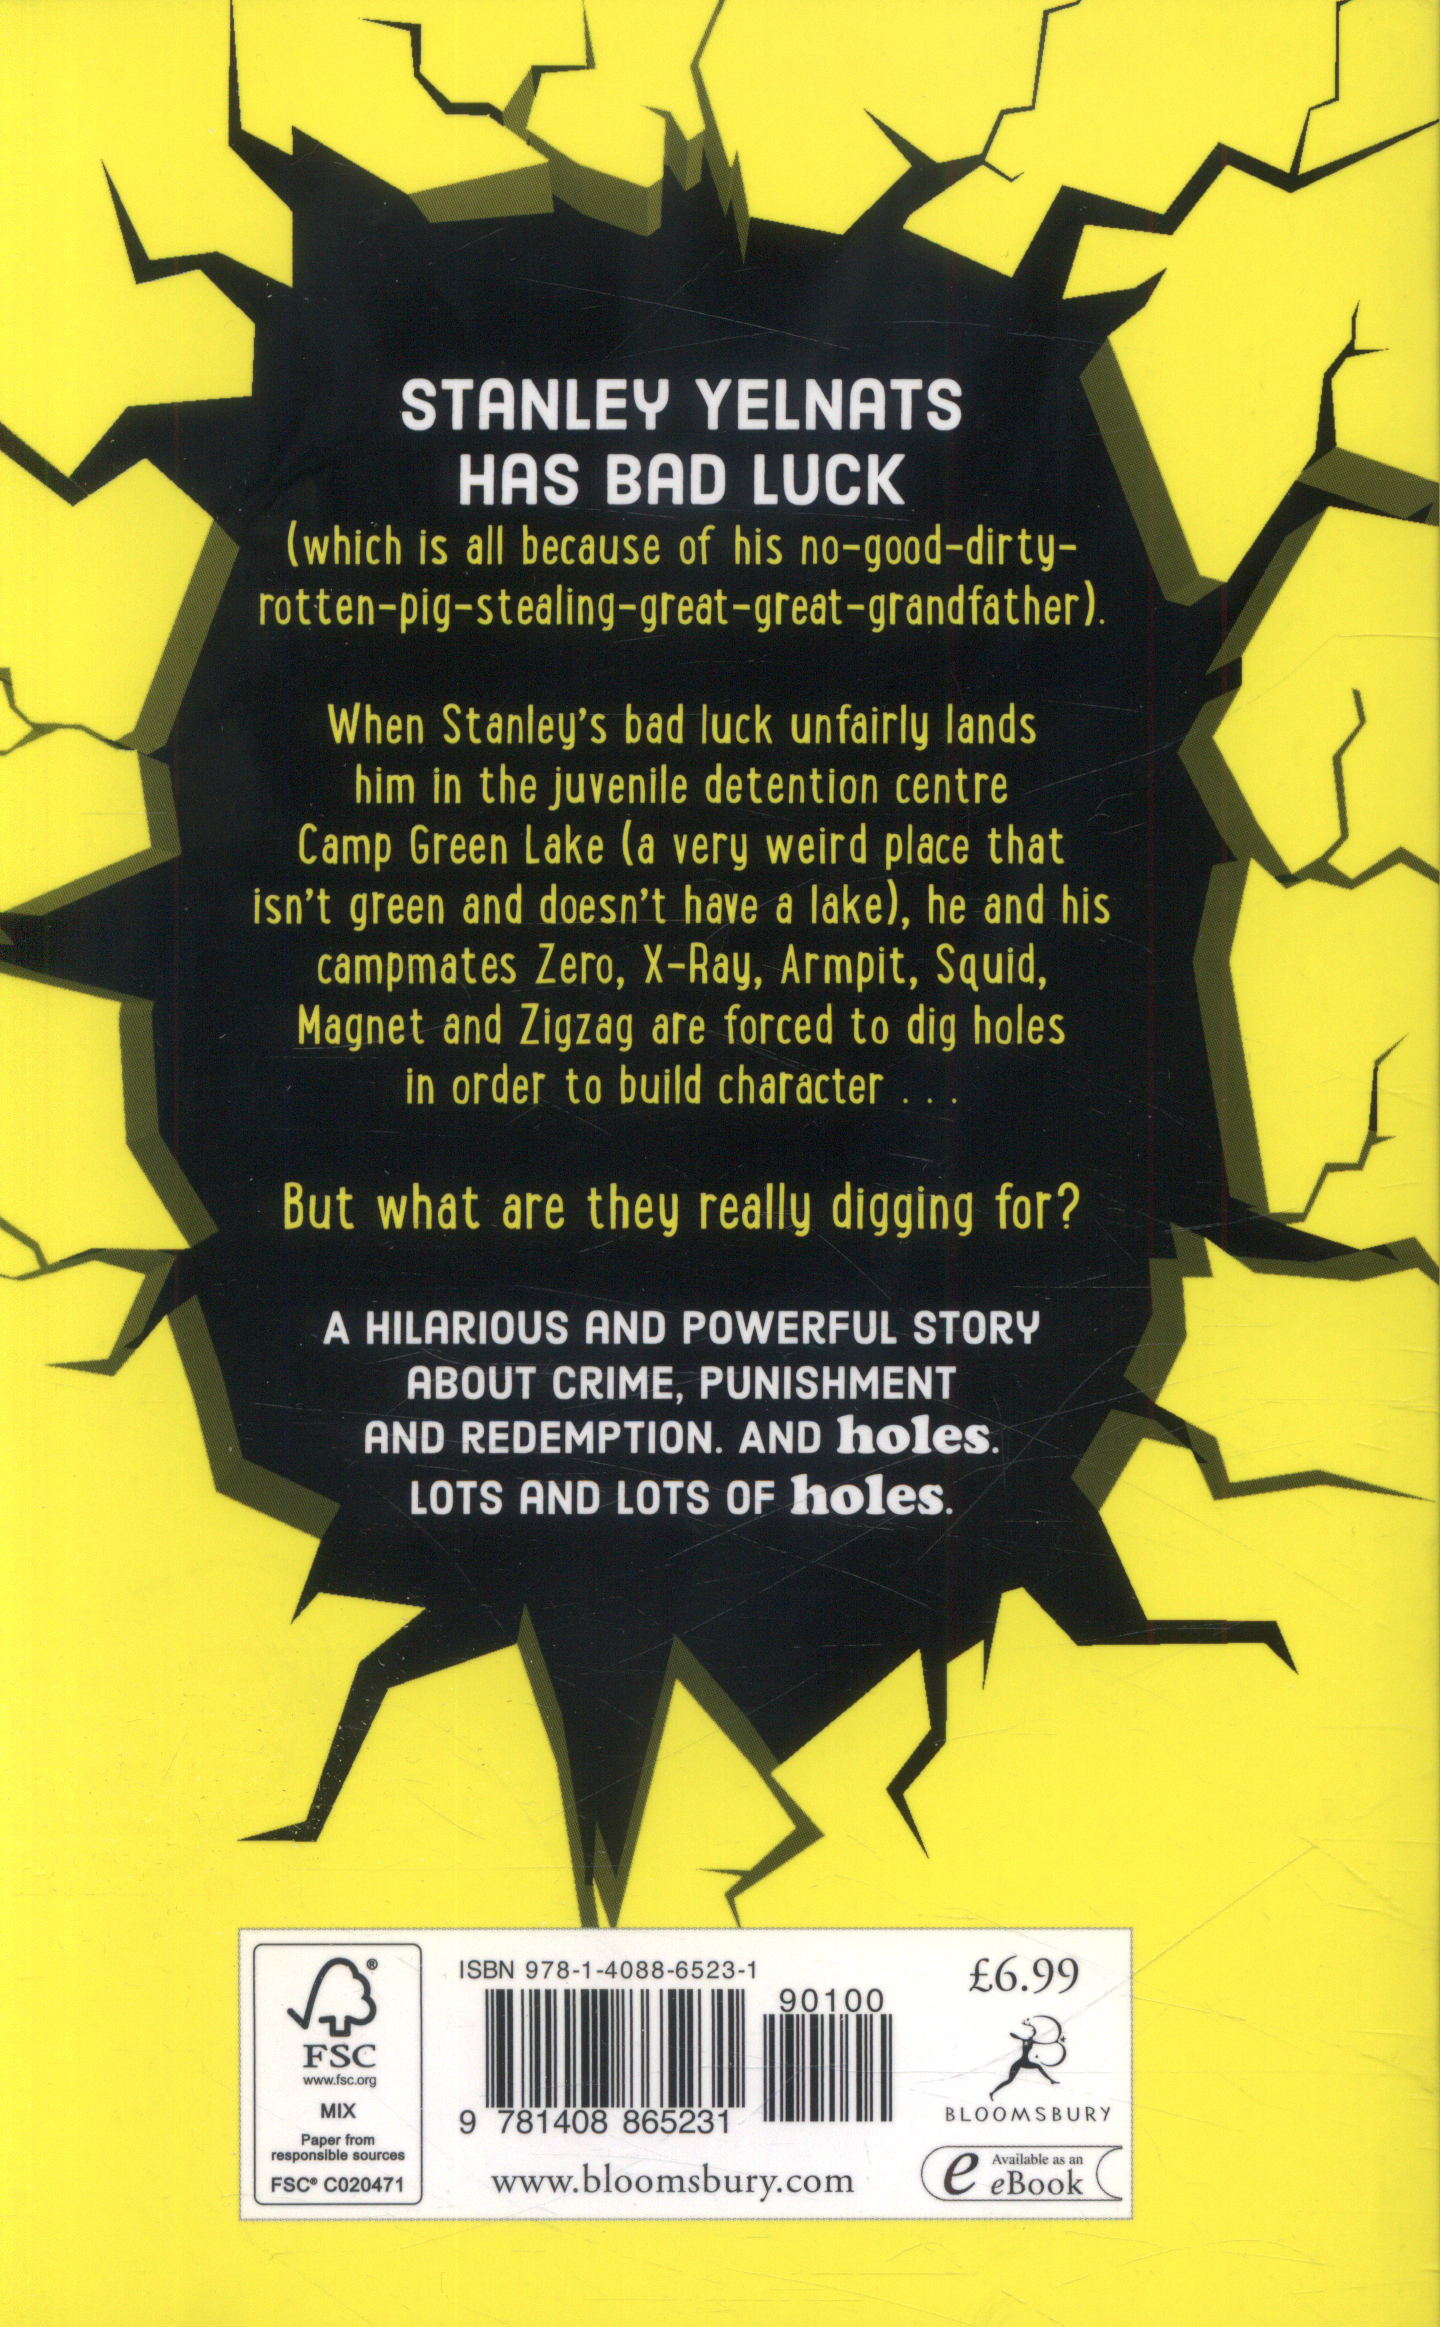 Holes by Louis Sachar Paperback Book -  UK